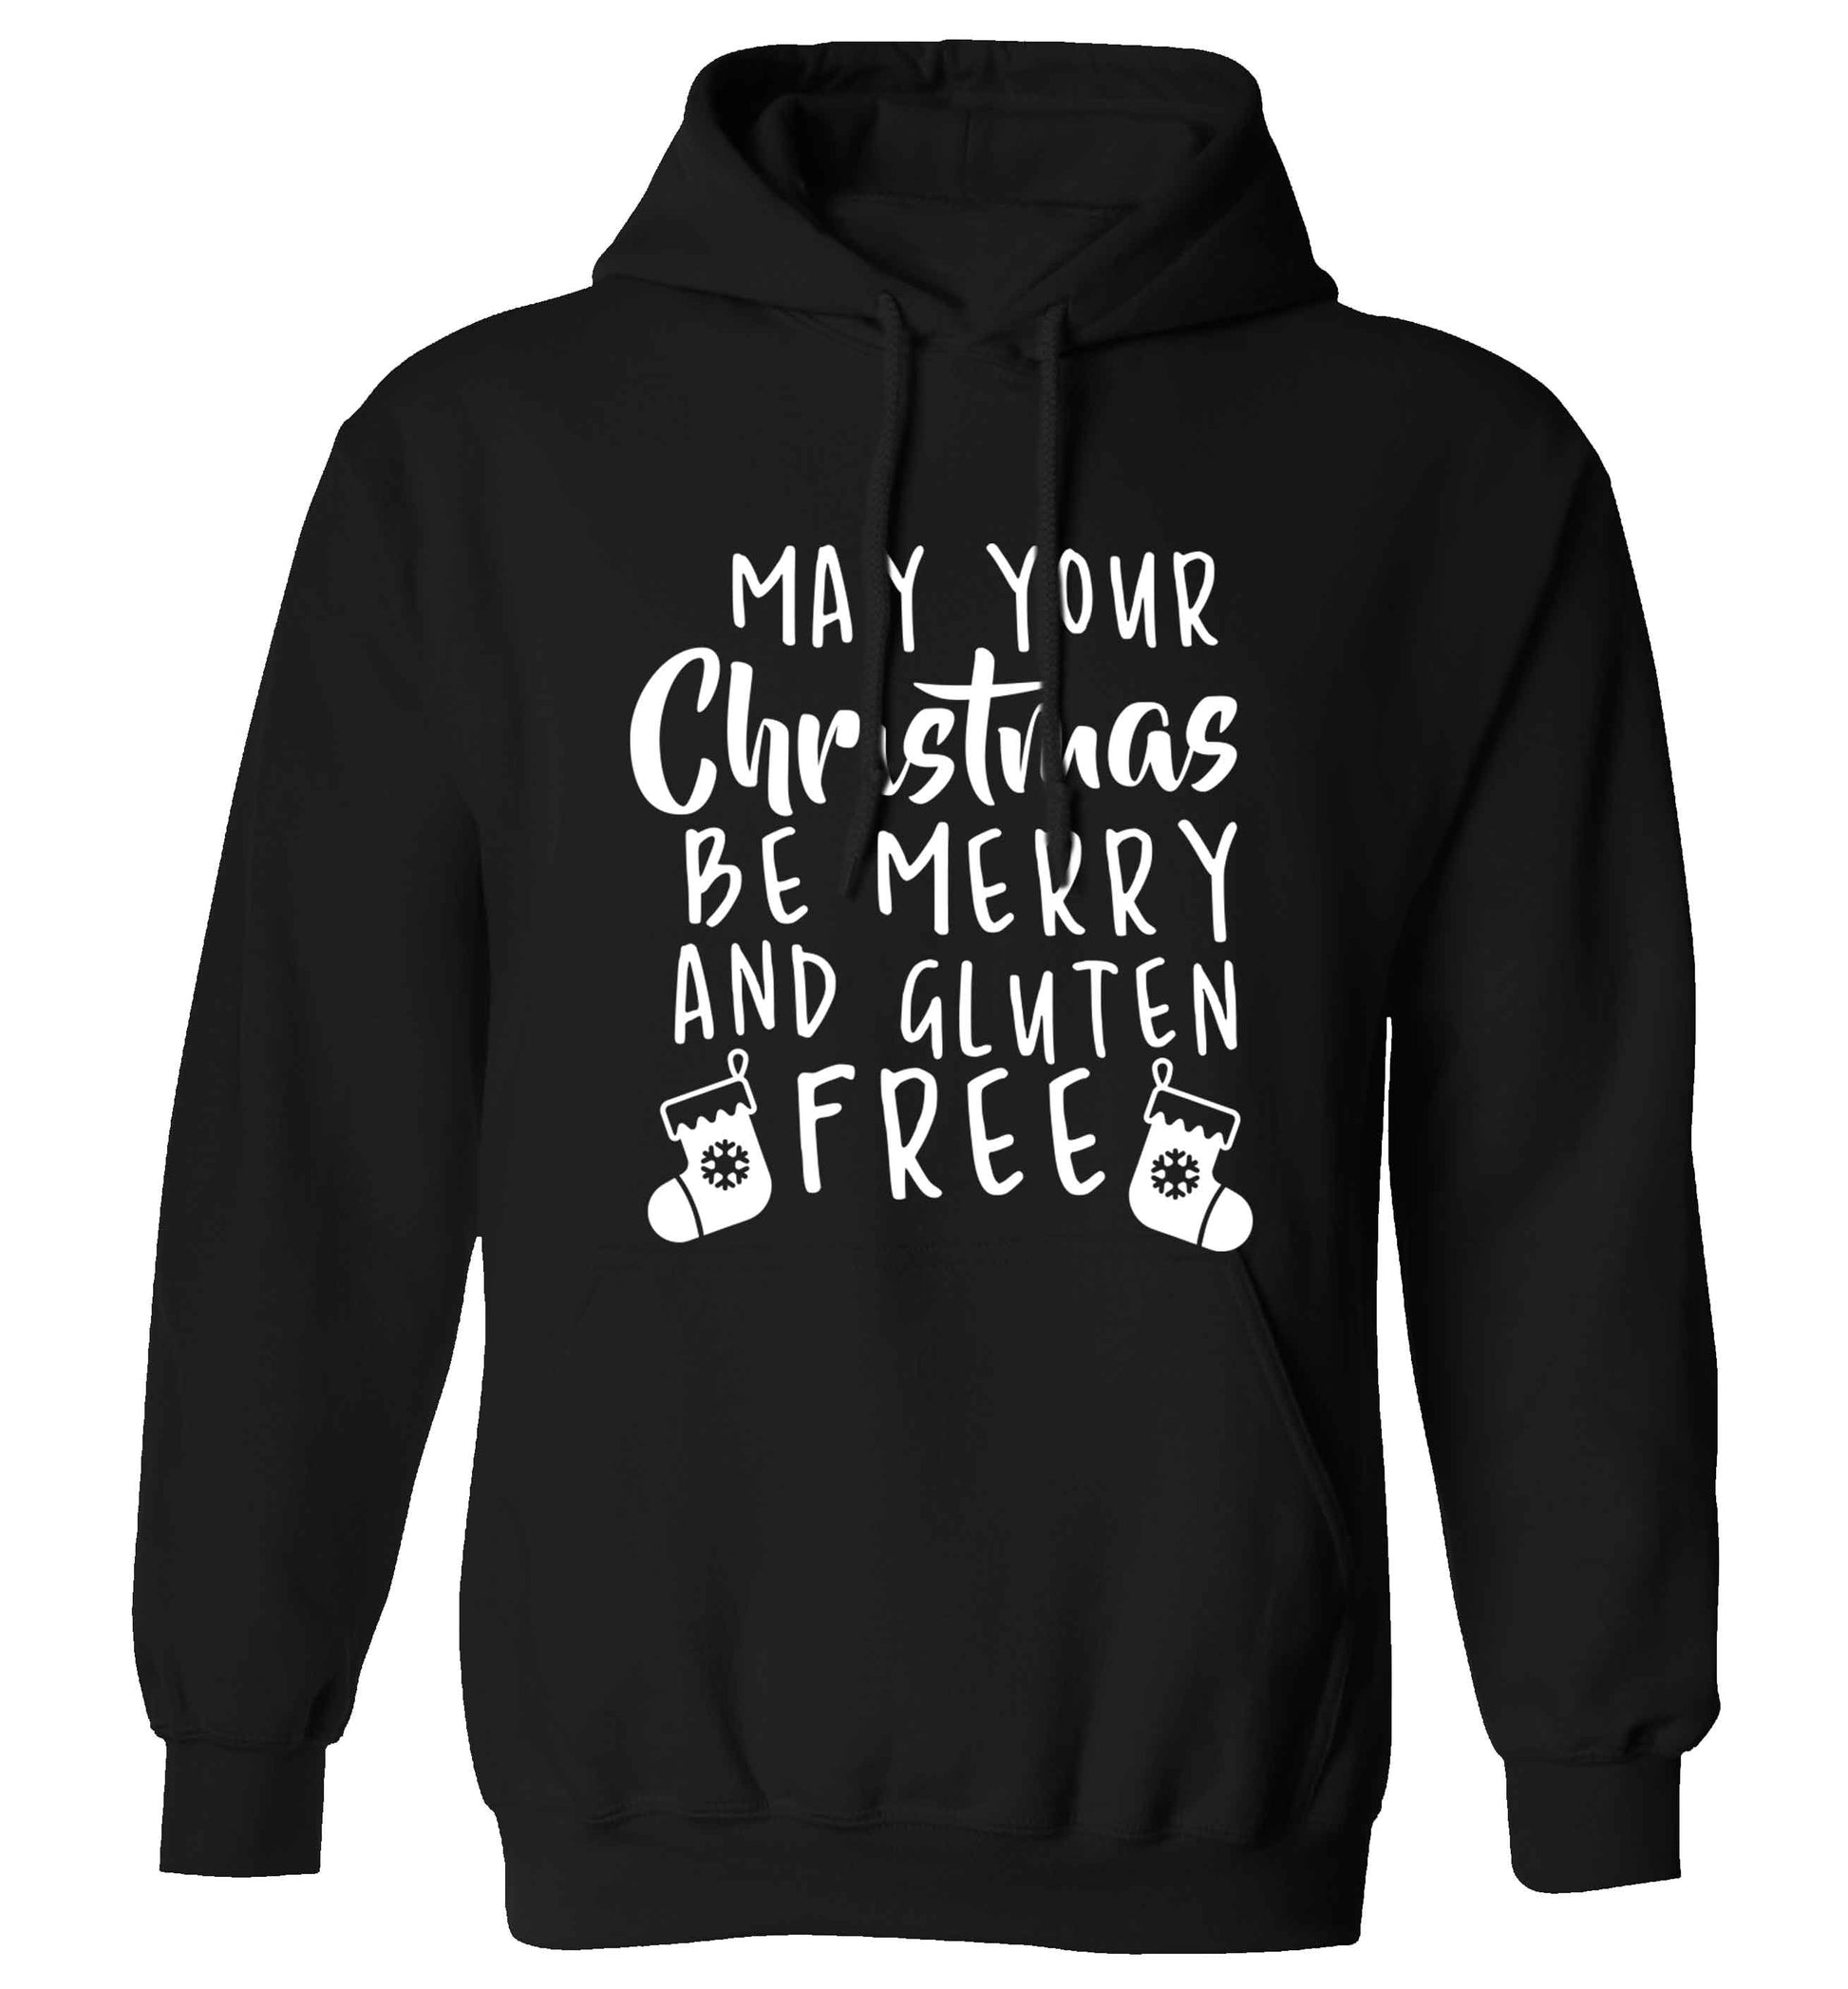 May your Christmas be merry and gluten free adults unisex black hoodie 2XL